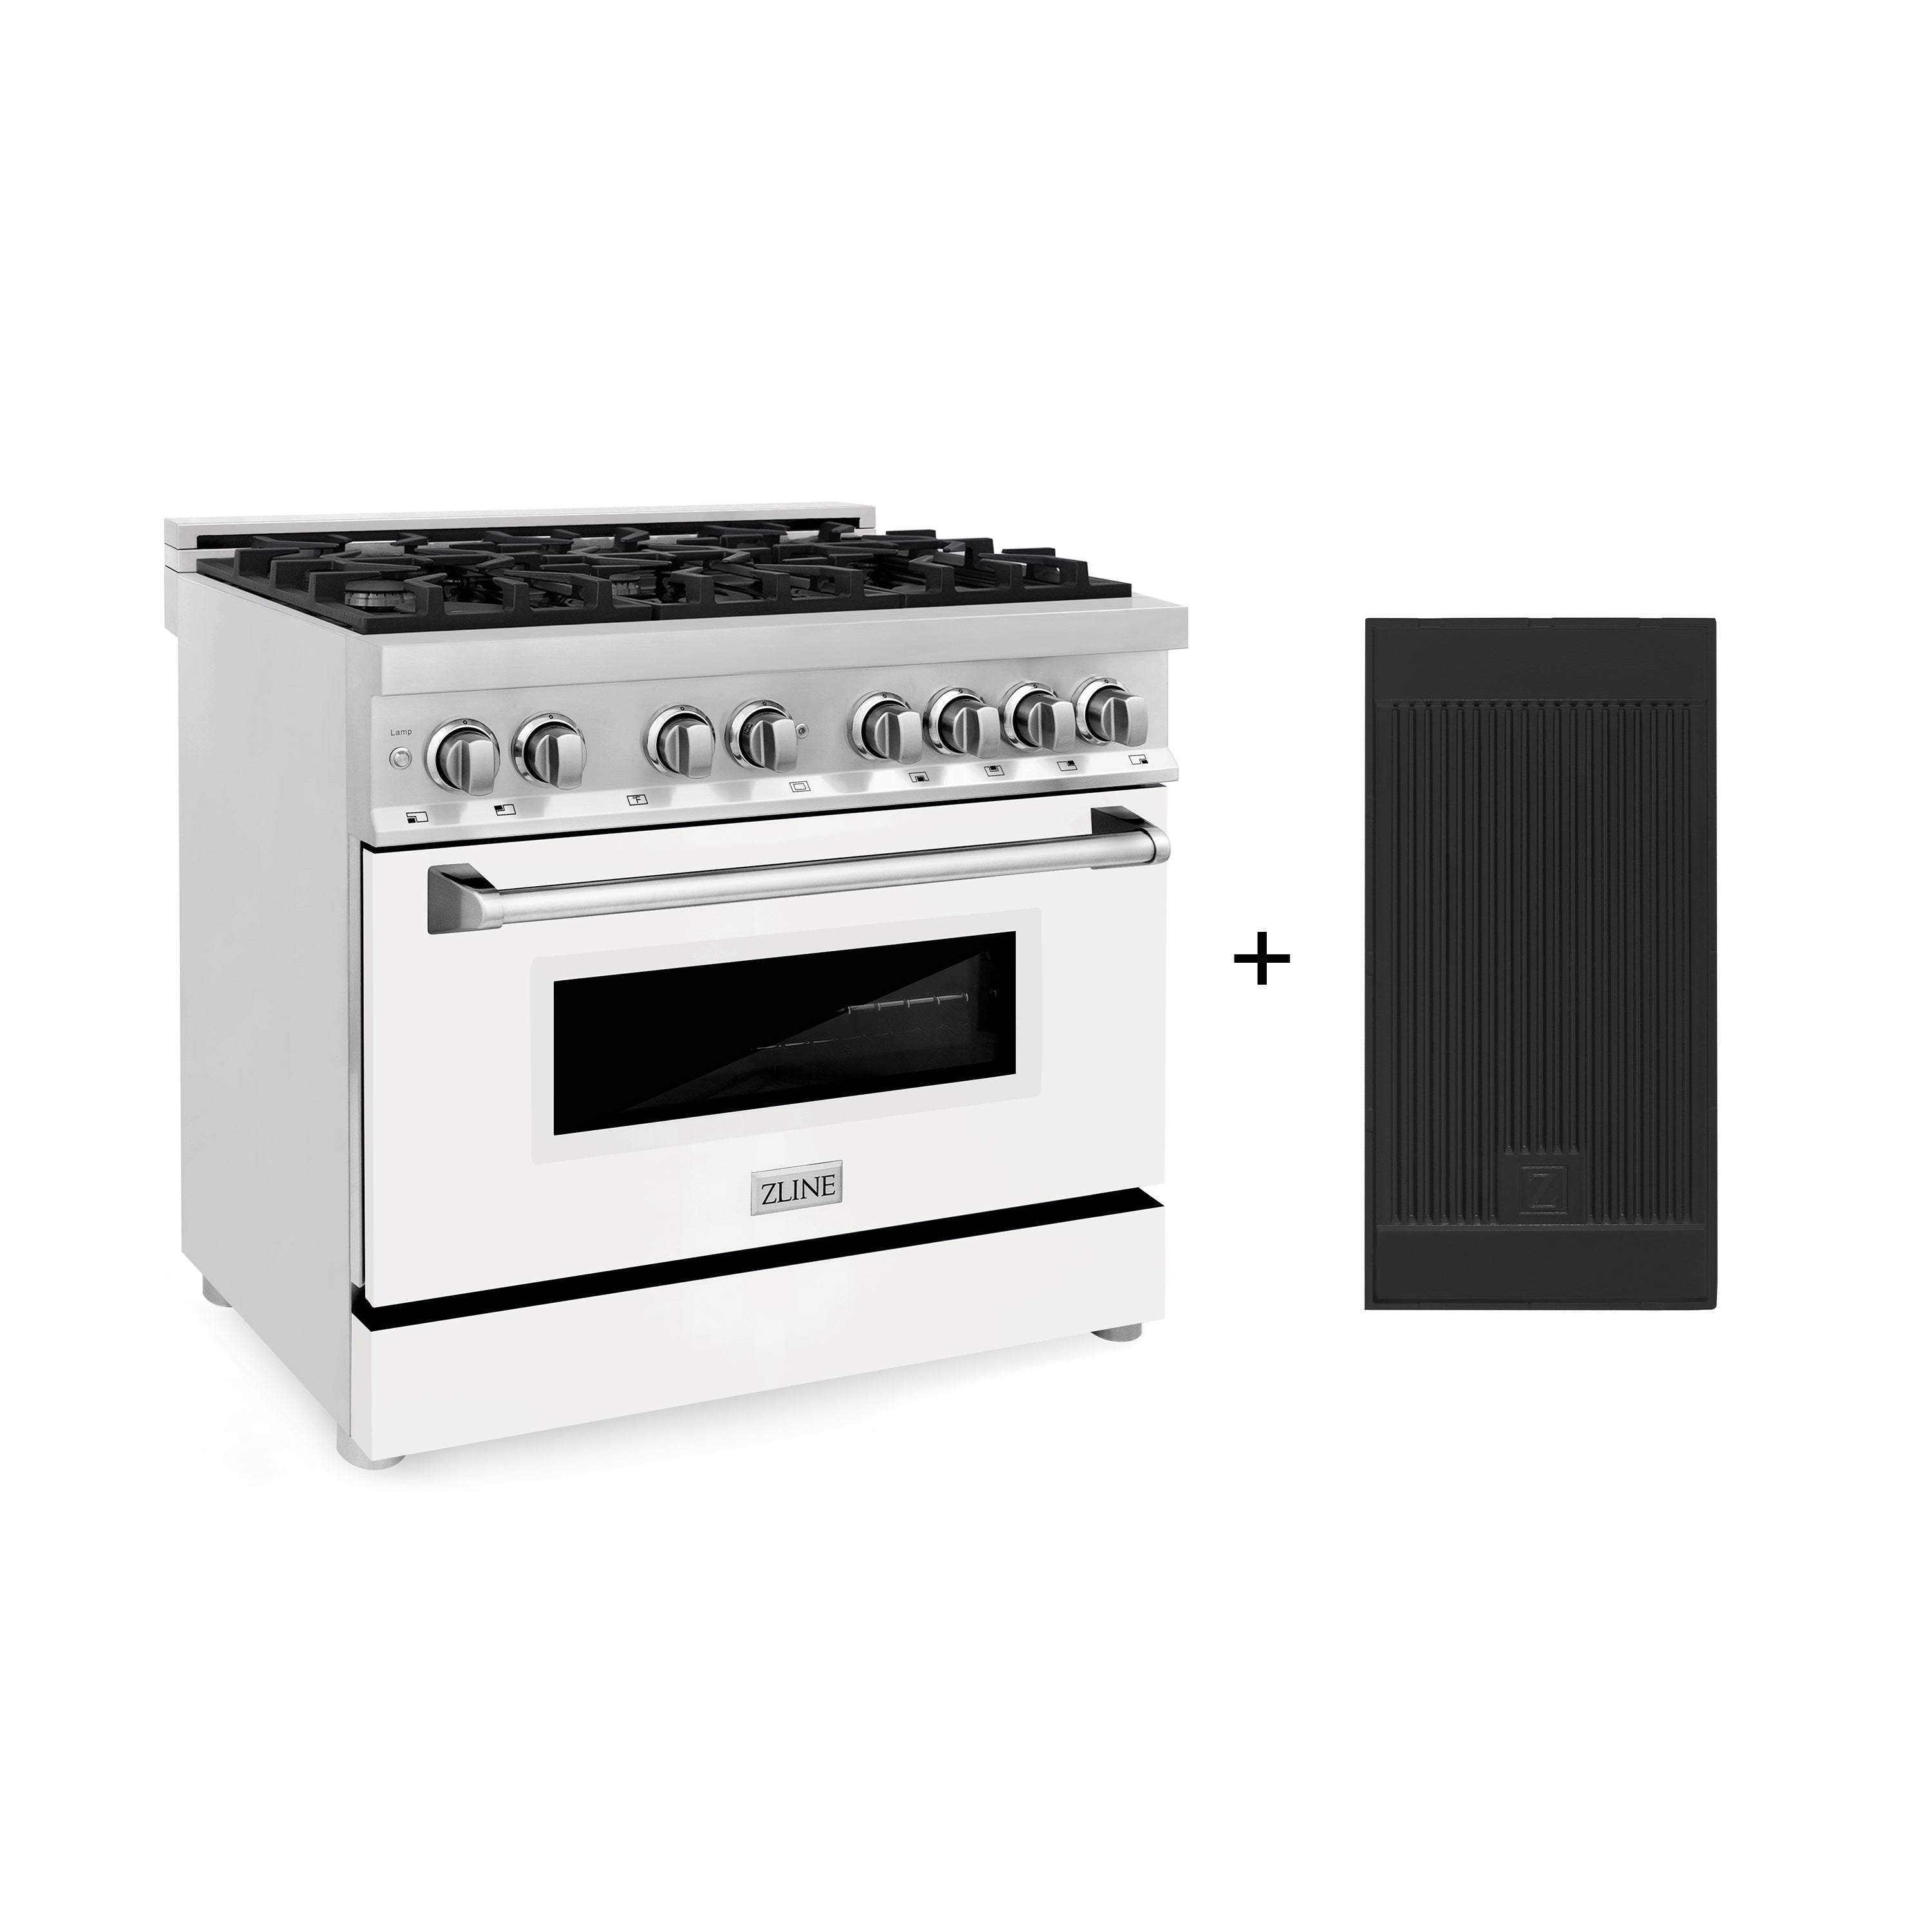 ZLINE 36" 4.6 cu. ft. Electric Oven and Gas Cooktop Dual Fuel Range with Griddle and White Matte Door in Stainless Steel (RA-WM-GR-36)